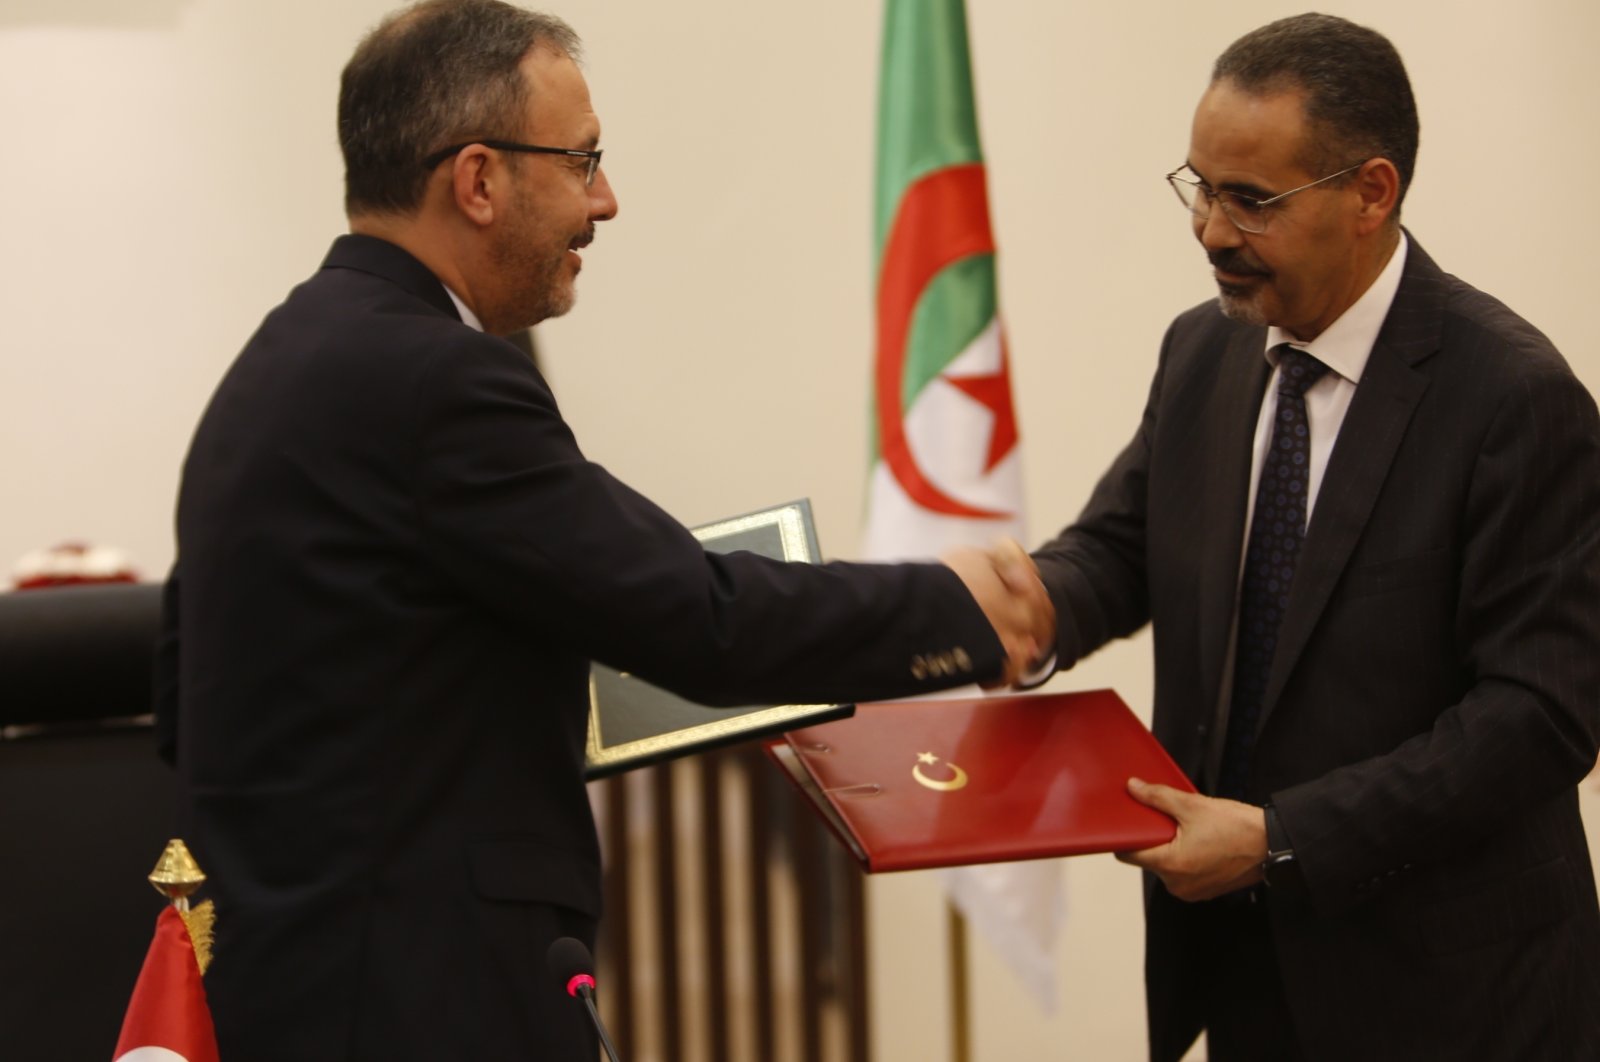 Sports Minister Mehmet Kasapoğlu (L) and his Algerian counterpart Abdel Razzaq Sabbak shake hands after signing a series of agreements, Algiers, Algeria, July 5, 2020. (AA Photo)